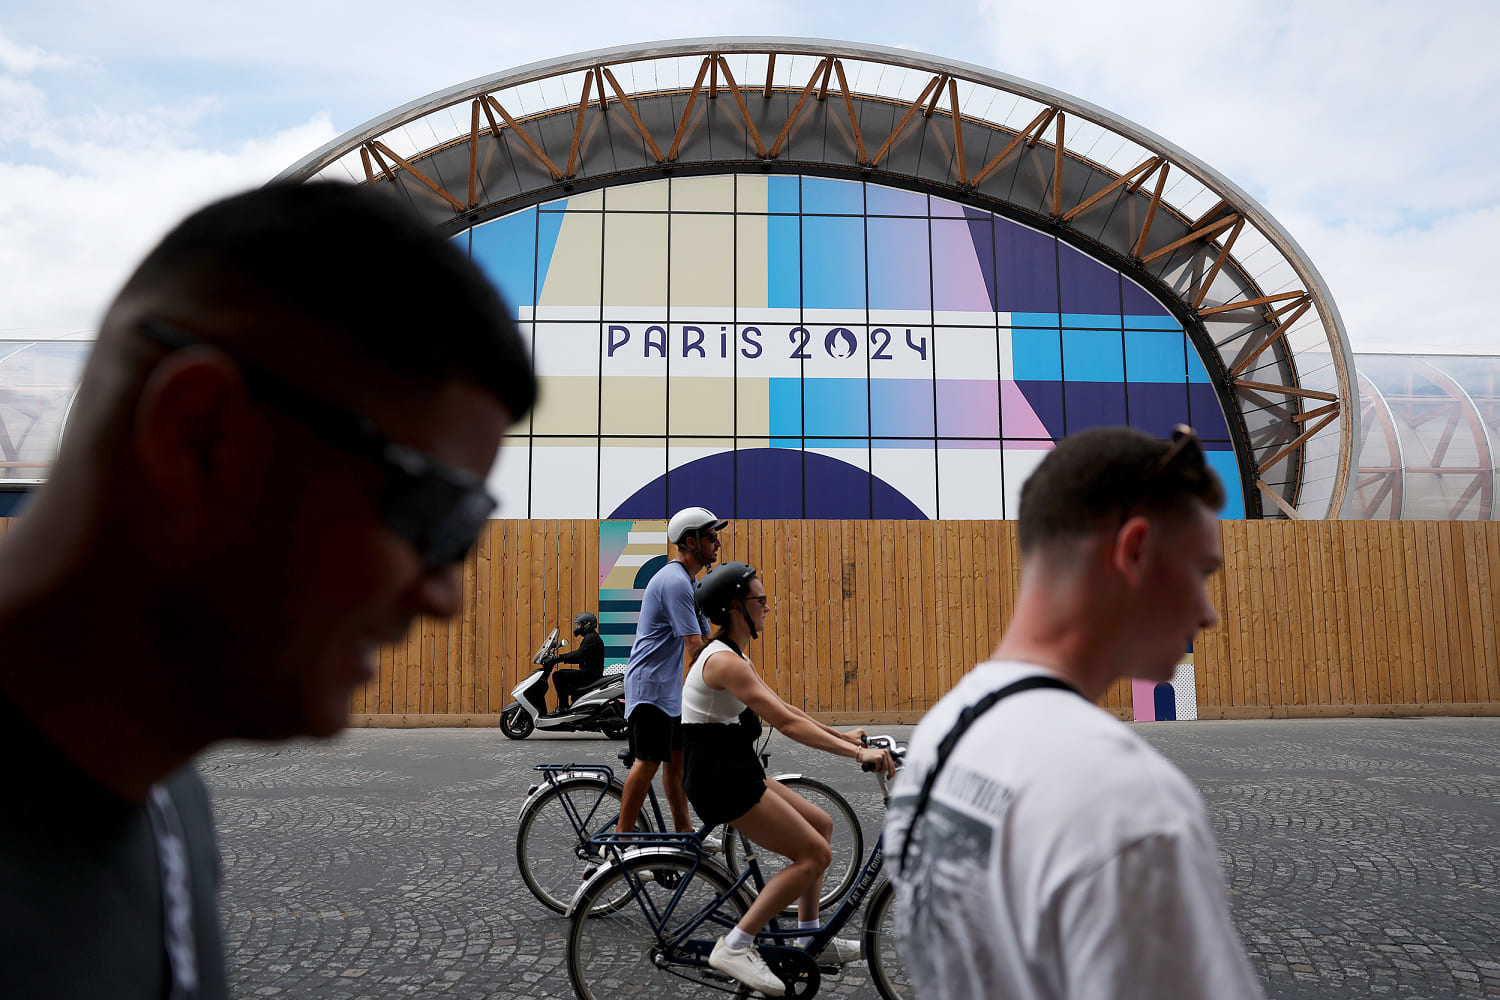 Paris is abuzz ahead of the Olympics Opening Ceremony as a festive atmosphere takes hold